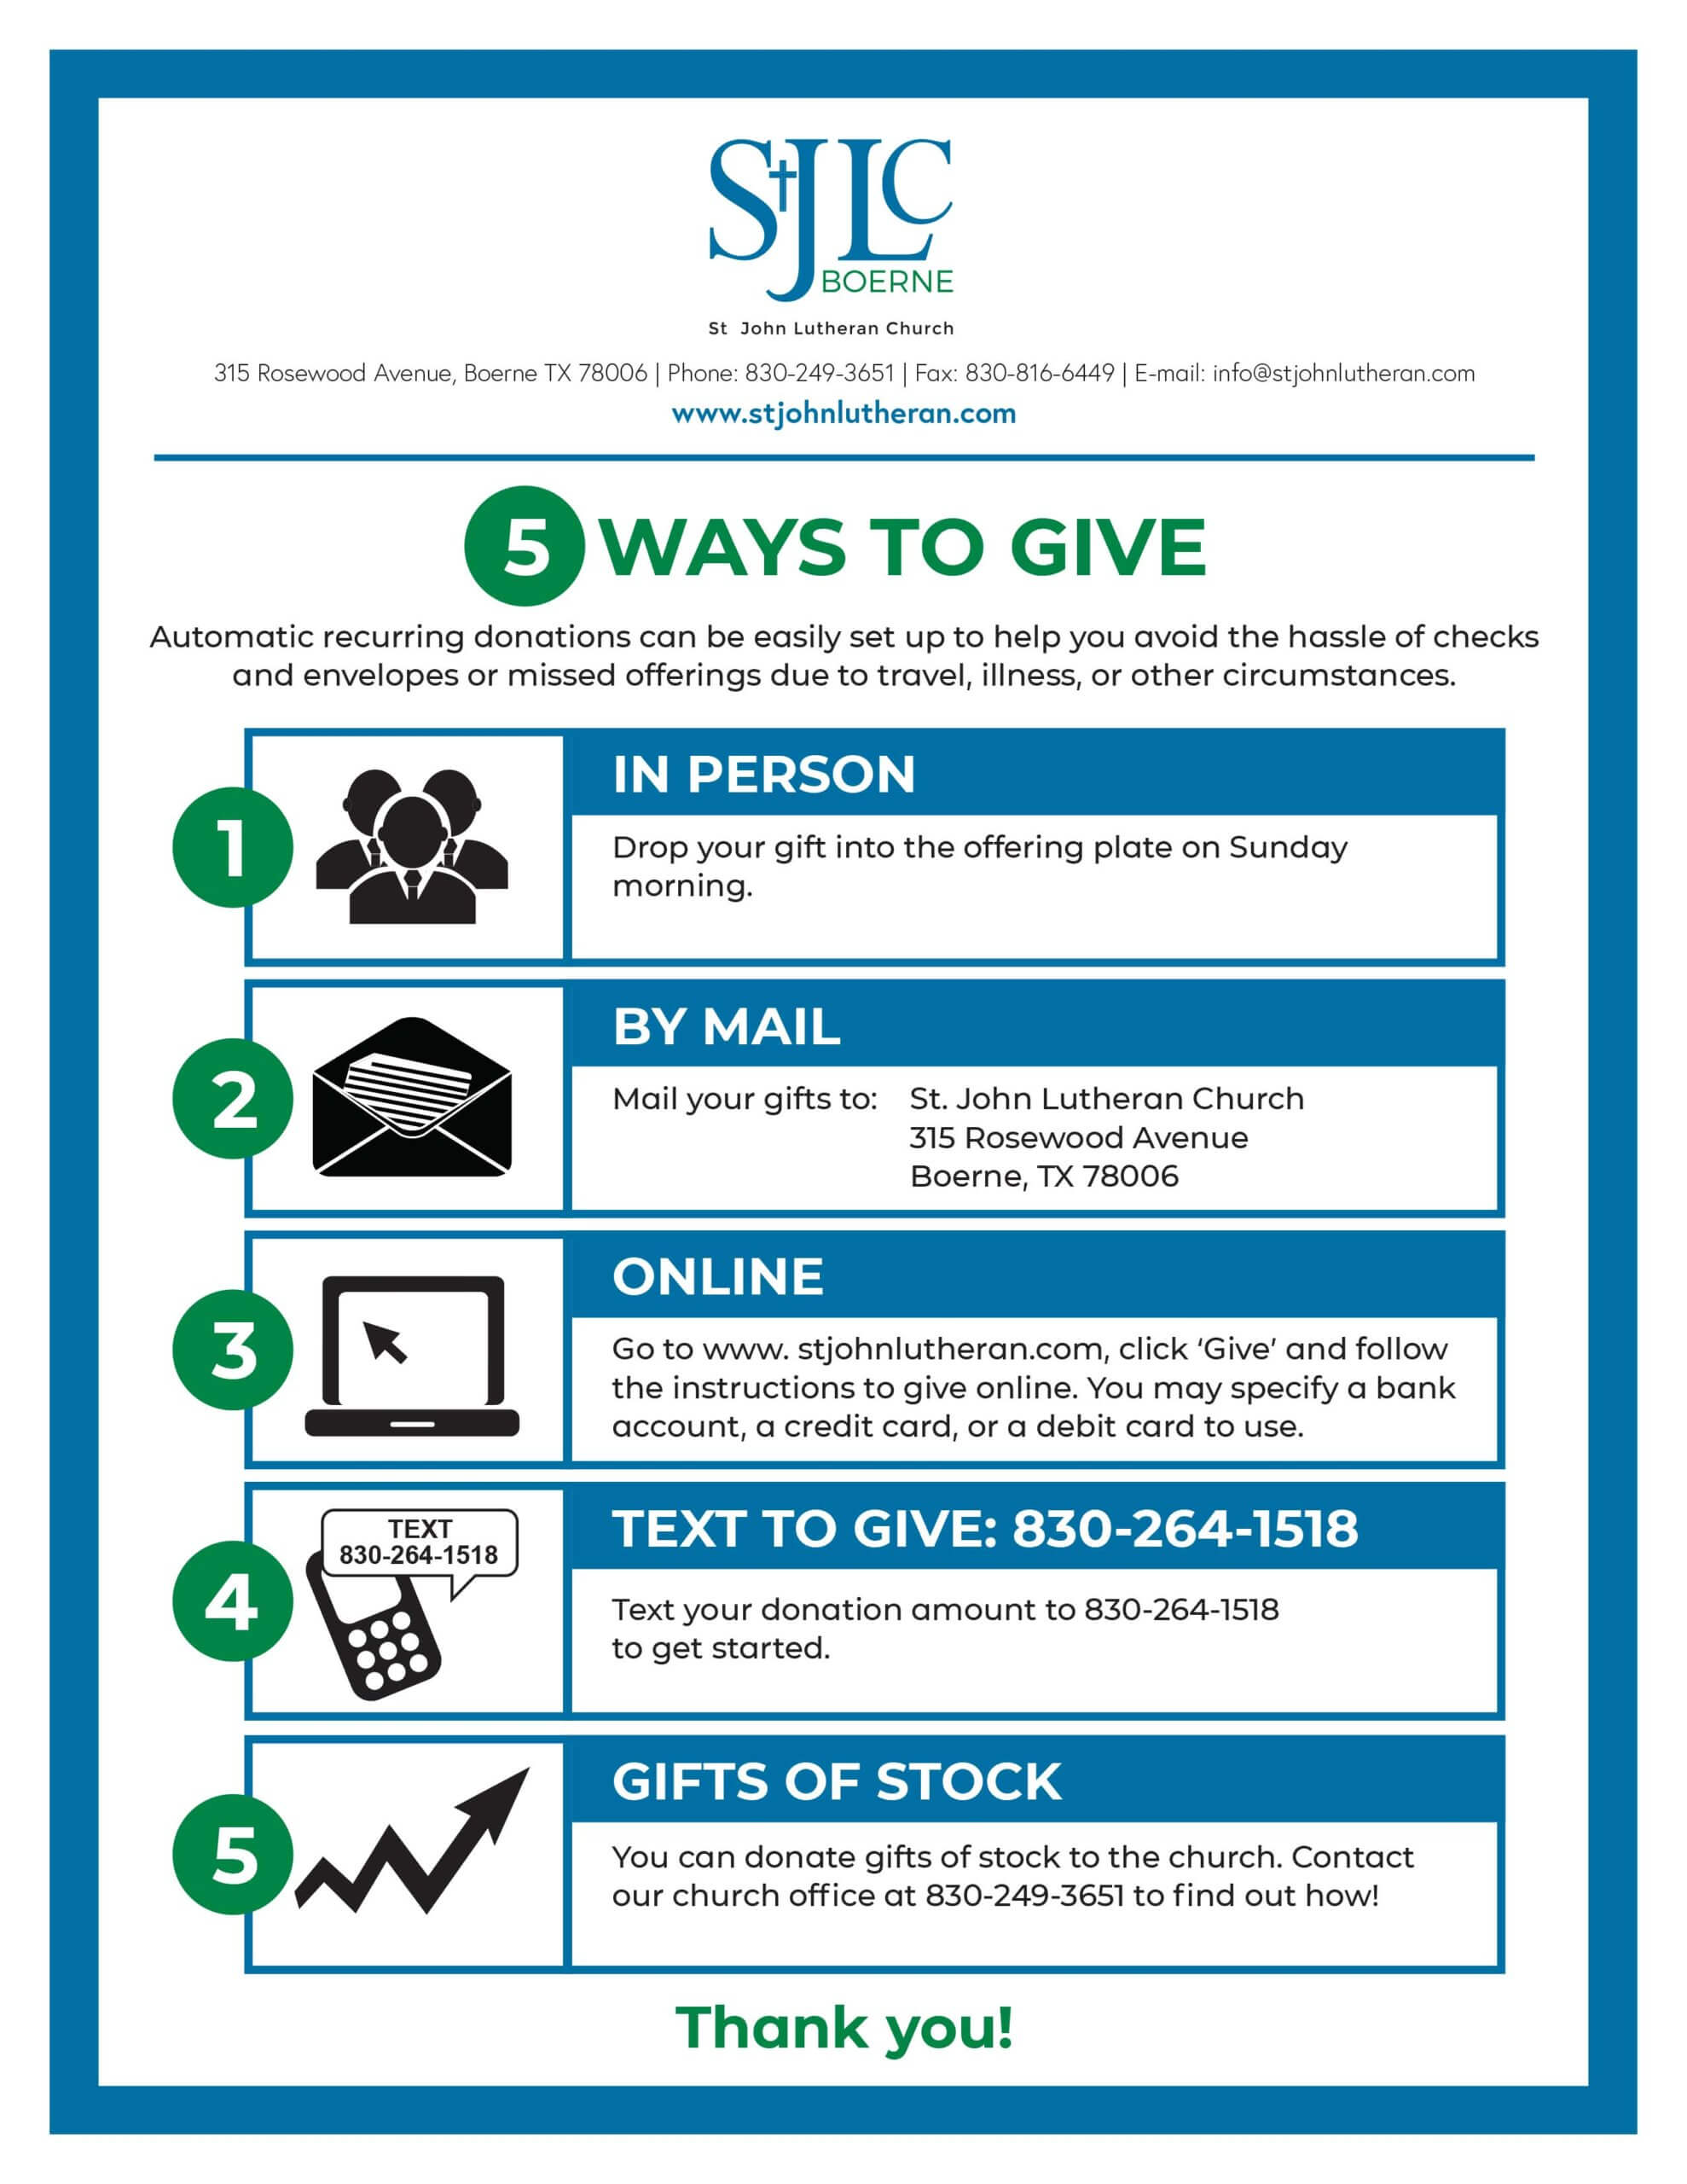 5 Ways to Give